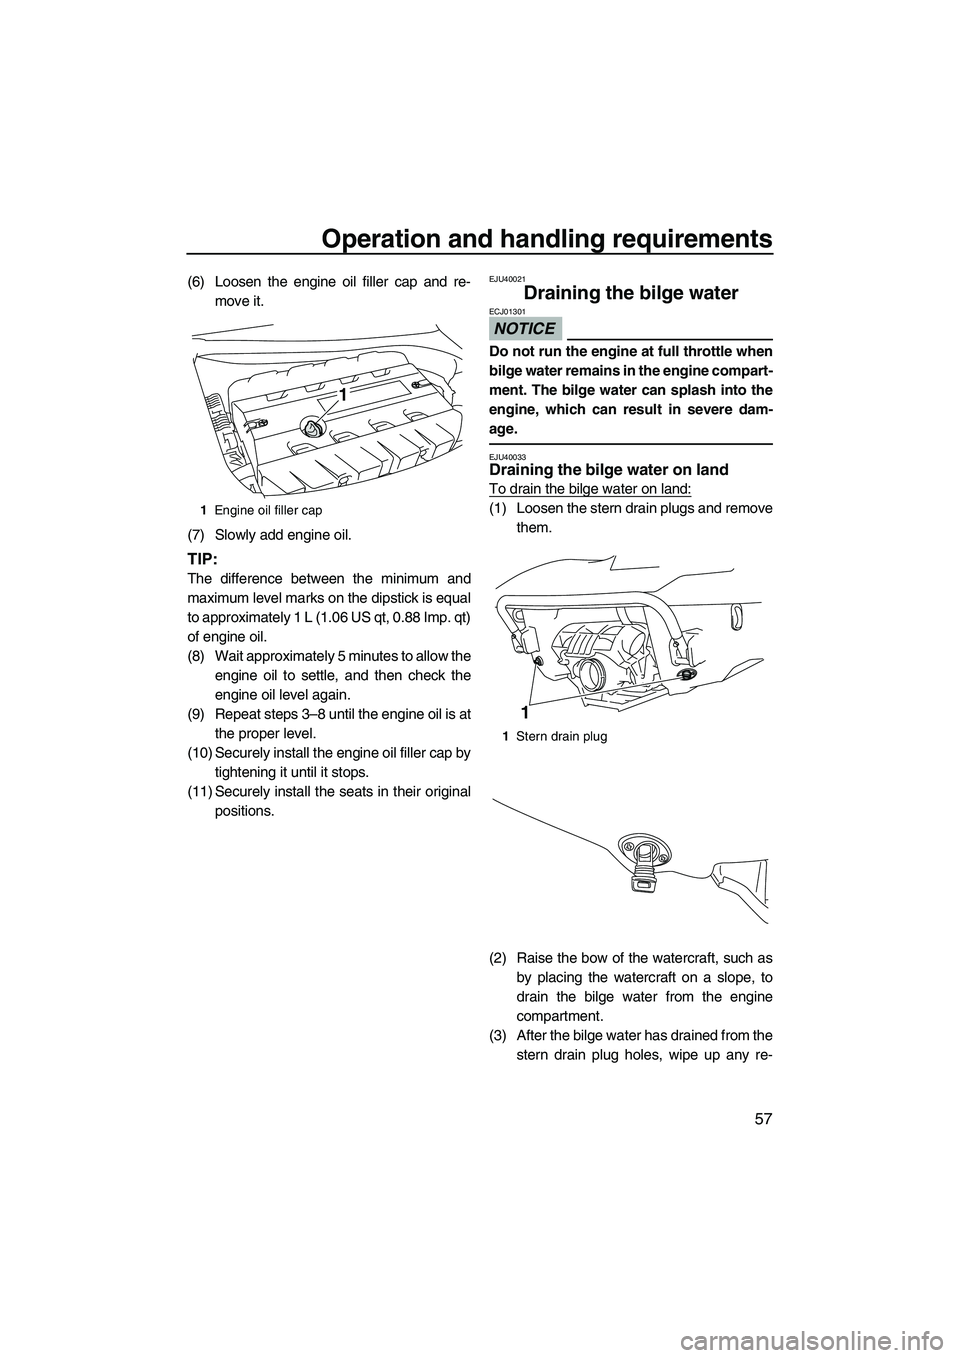 YAMAHA SVHO 2011  Owners Manual Operation and handling requirements
57
(6) Loosen the engine oil filler cap and re-
move it.
(7) Slowly add engine oil.
TIP:
The difference between the minimum and
maximum level marks on the dipstick 